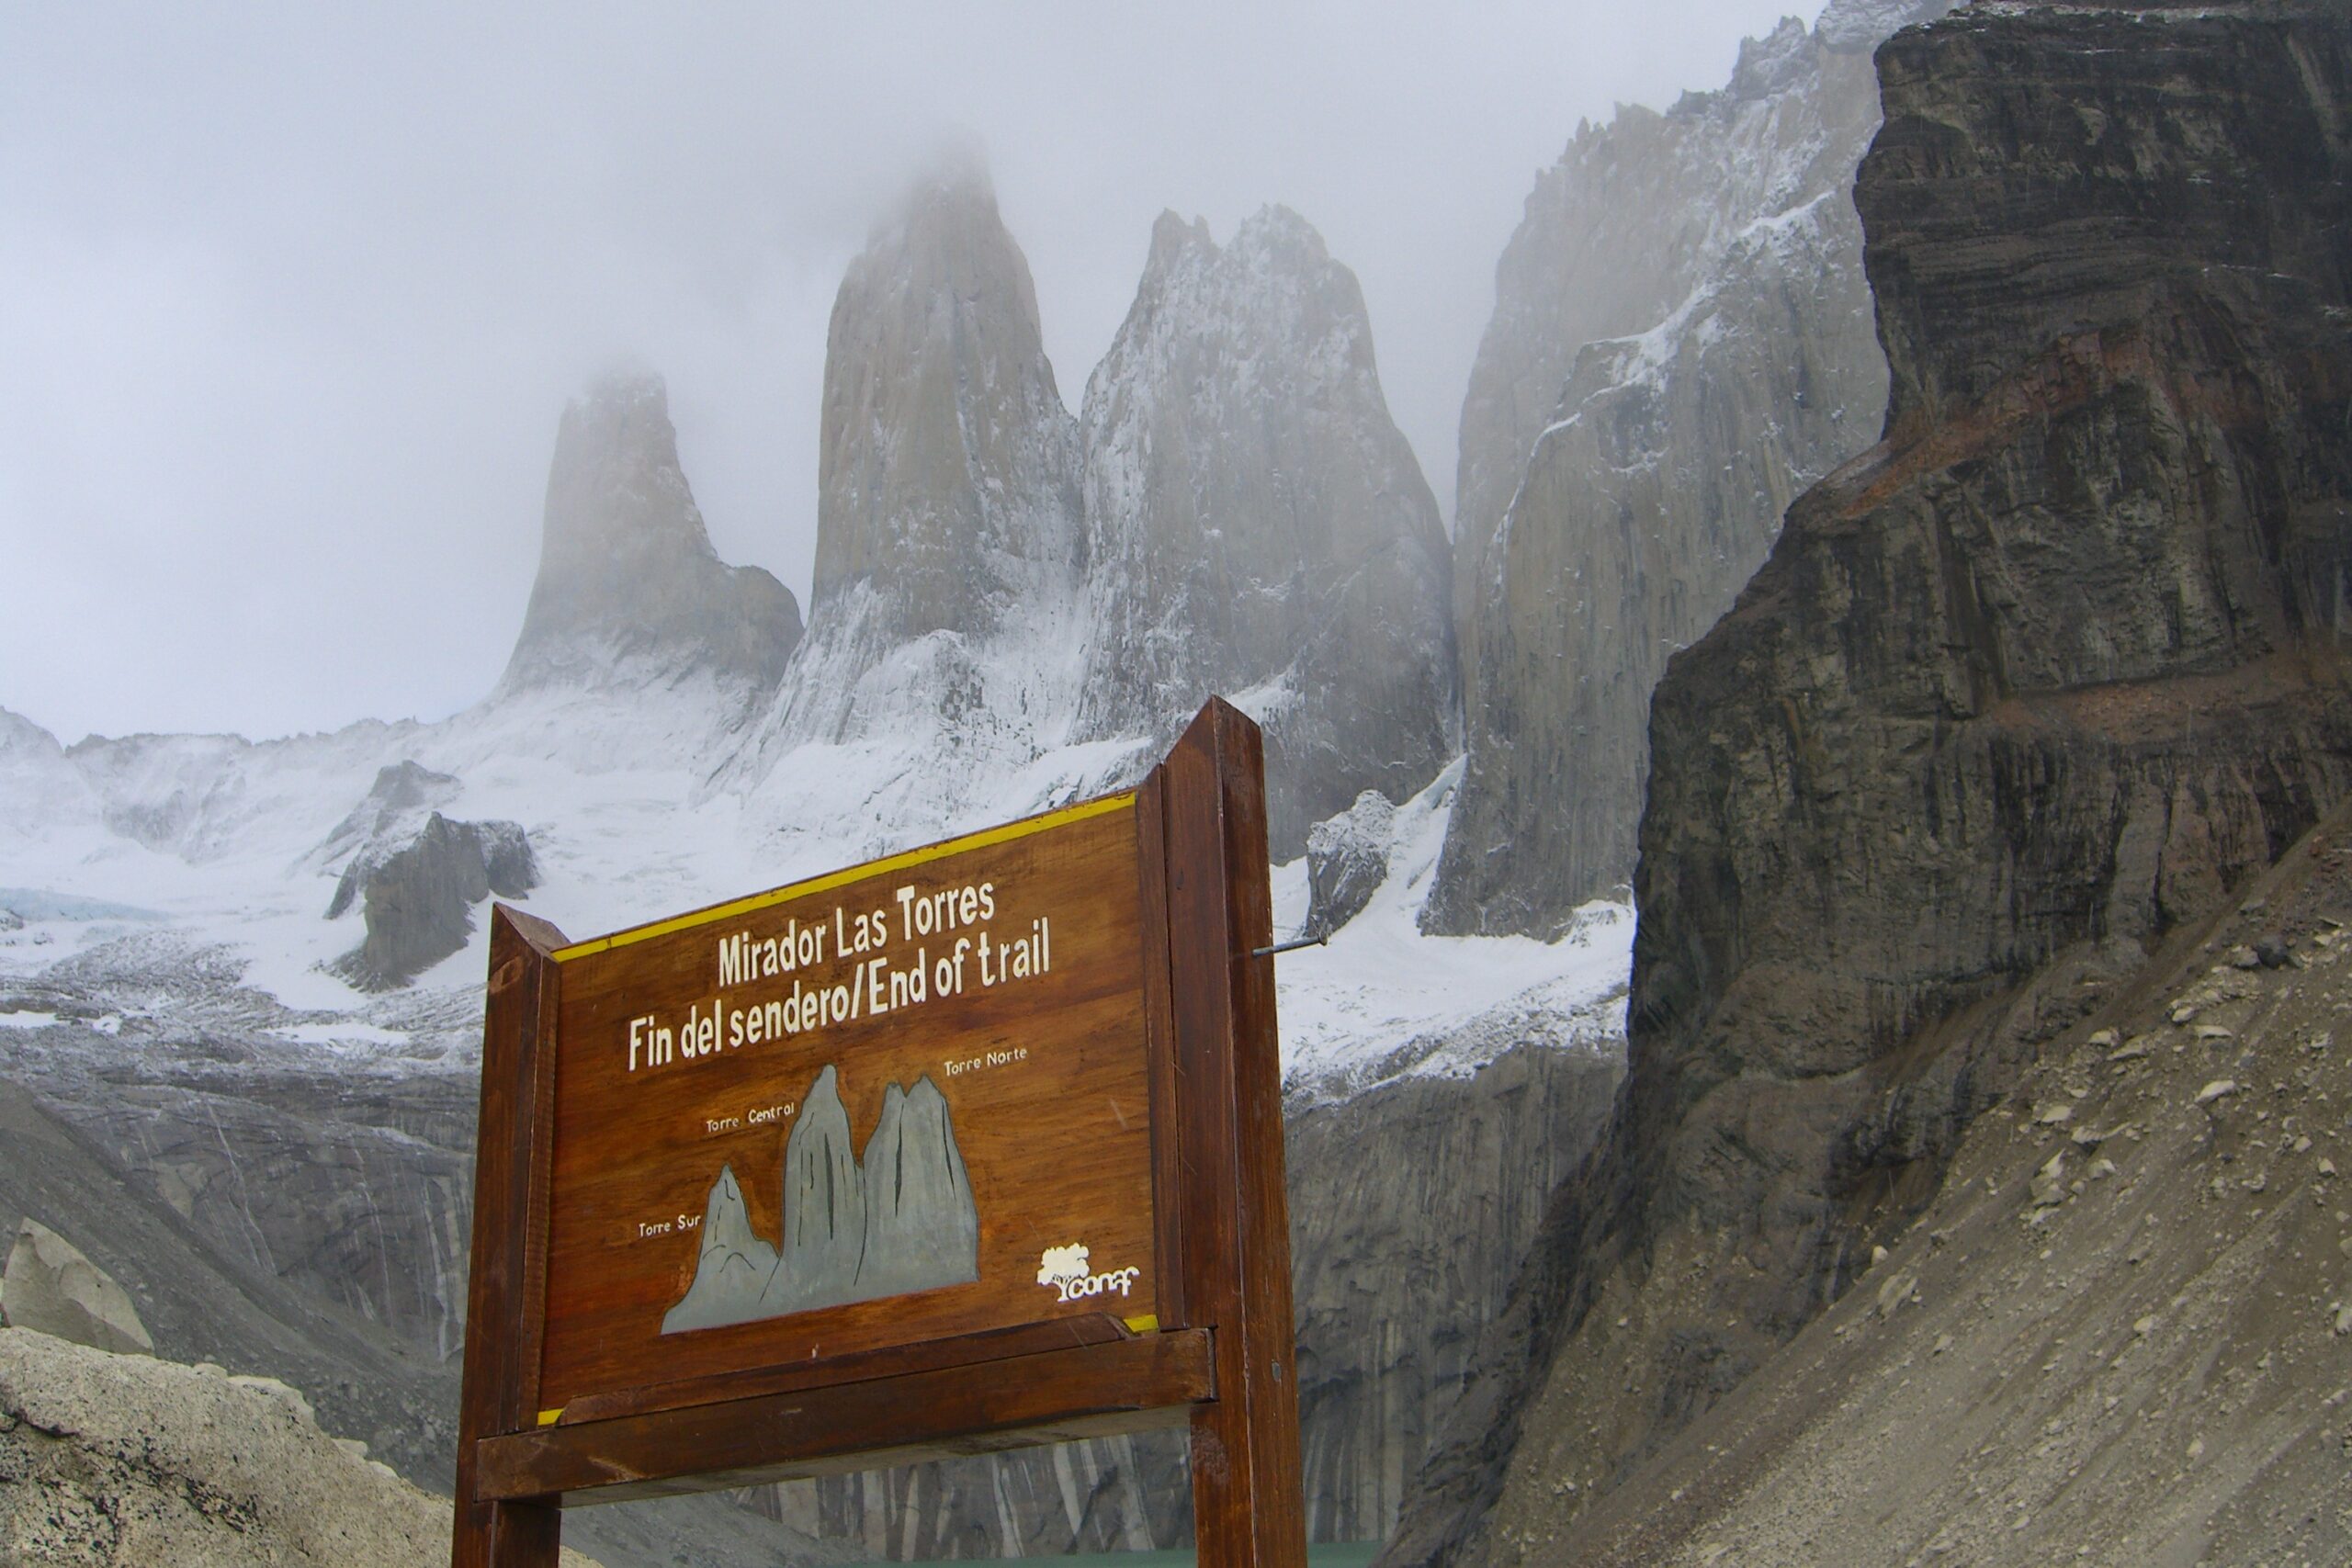 An end-of-trail sign greets hikers below the Torres del Paine in Chilean Patagonia.